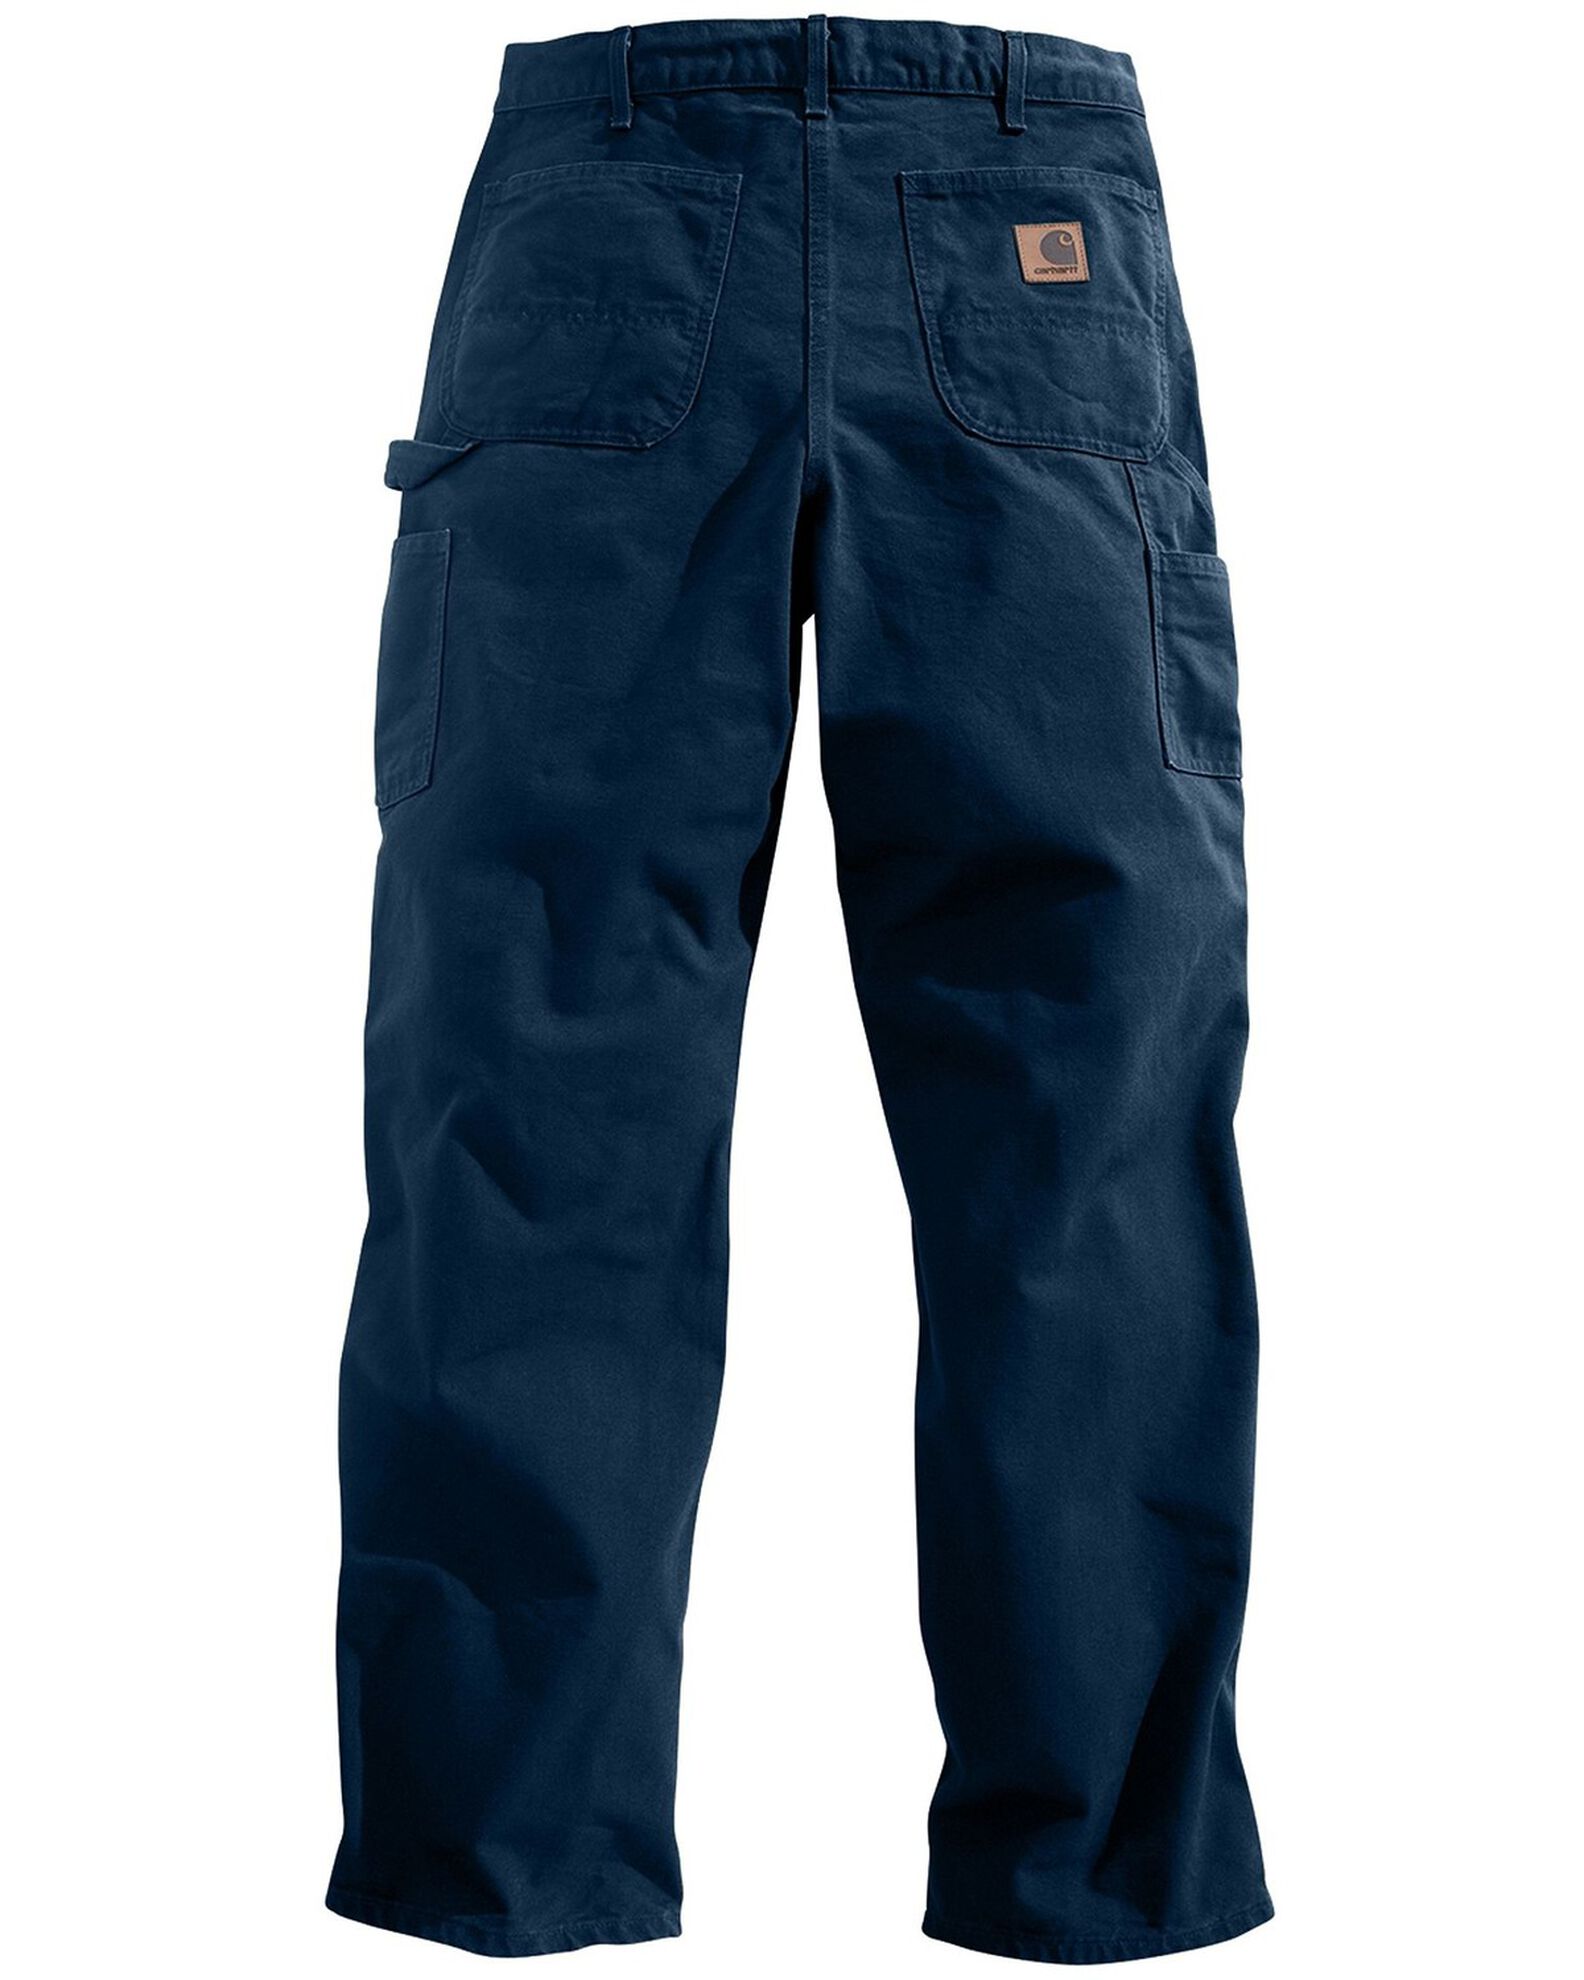 Carhartt 30 Size Pants for Men for sale